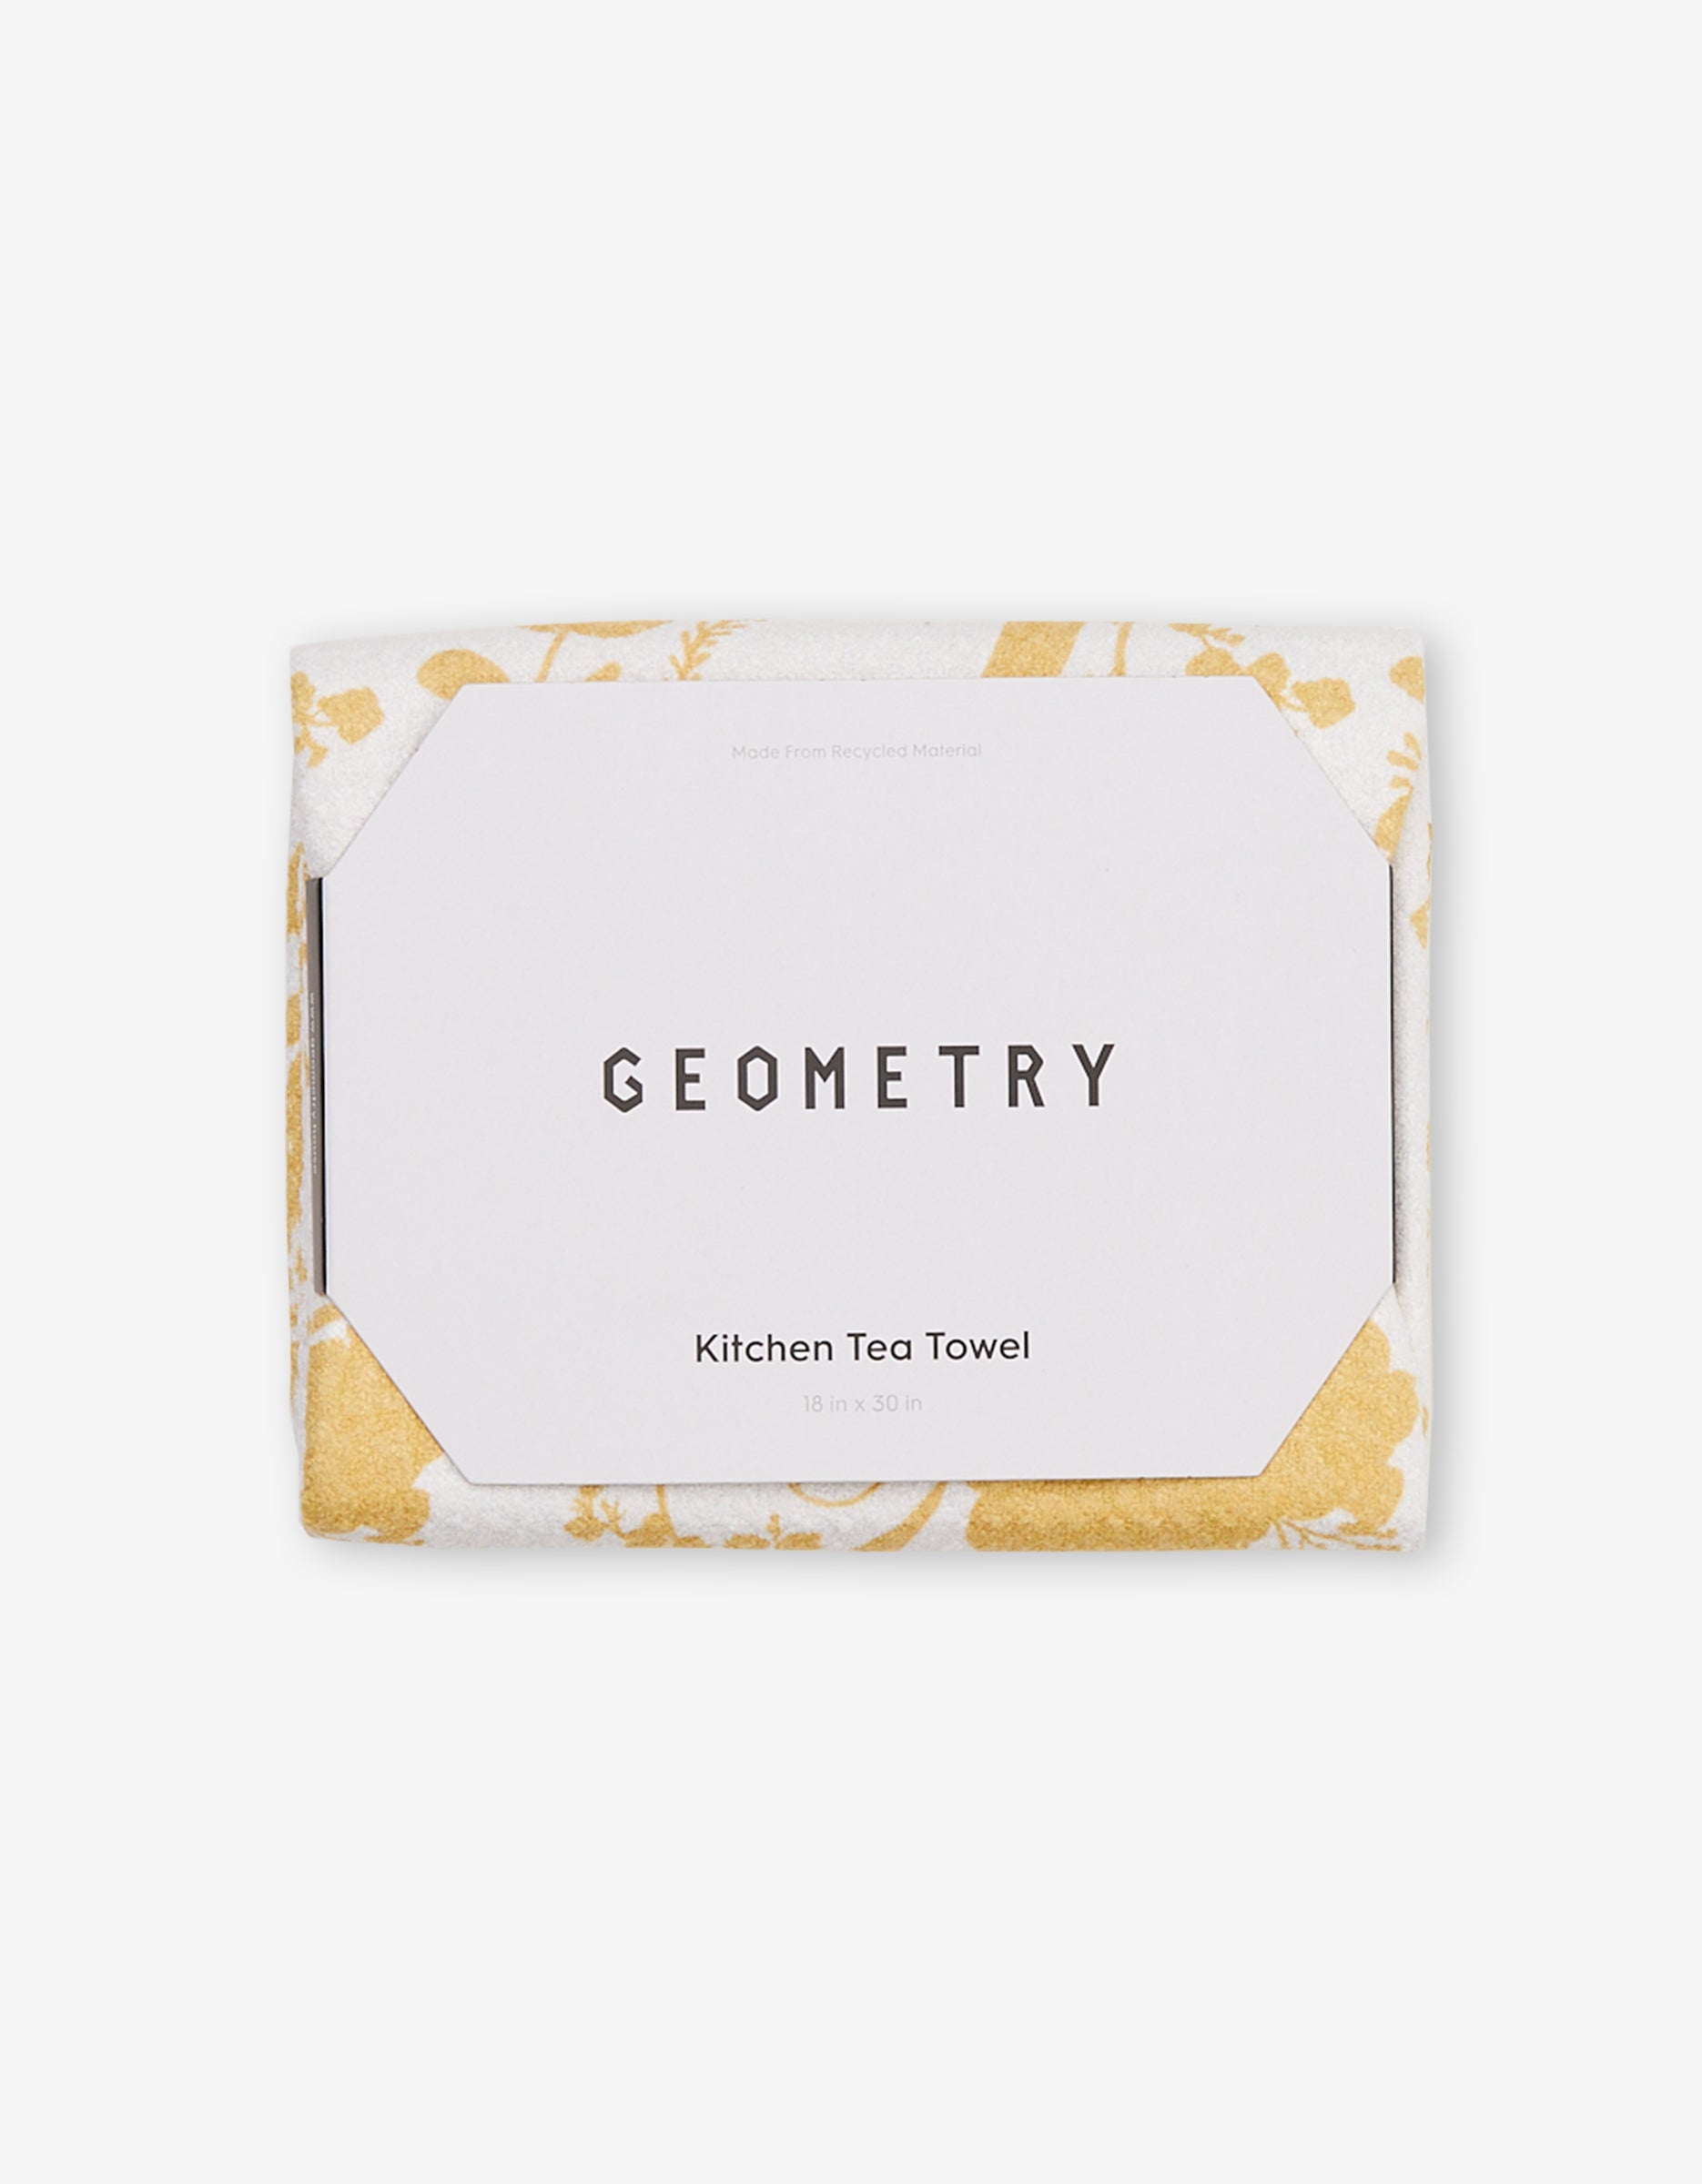 Geometry Towels  Are They Actually Worth The Price? - Made It